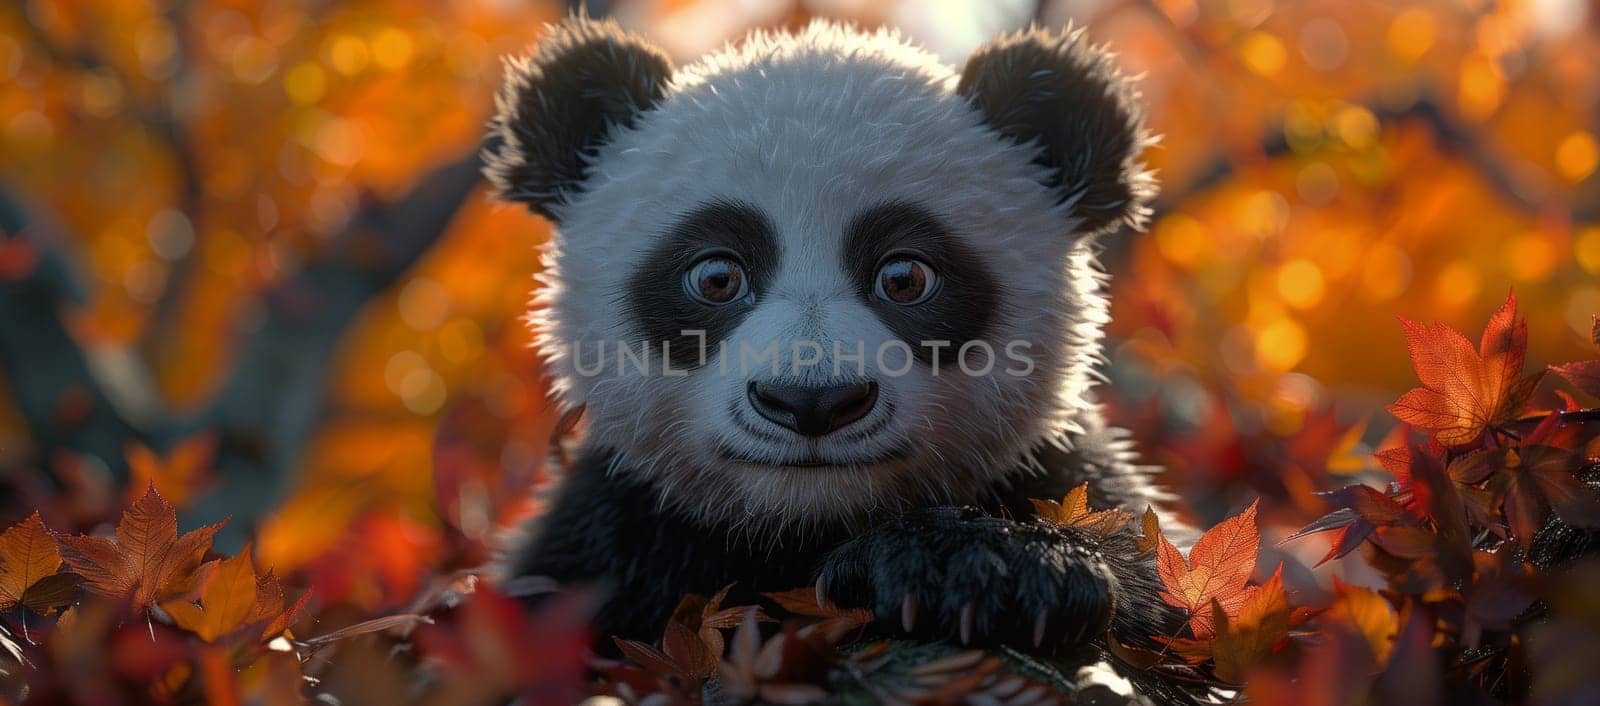 A panda bear sits among fallen leaves in a forest by richwolf